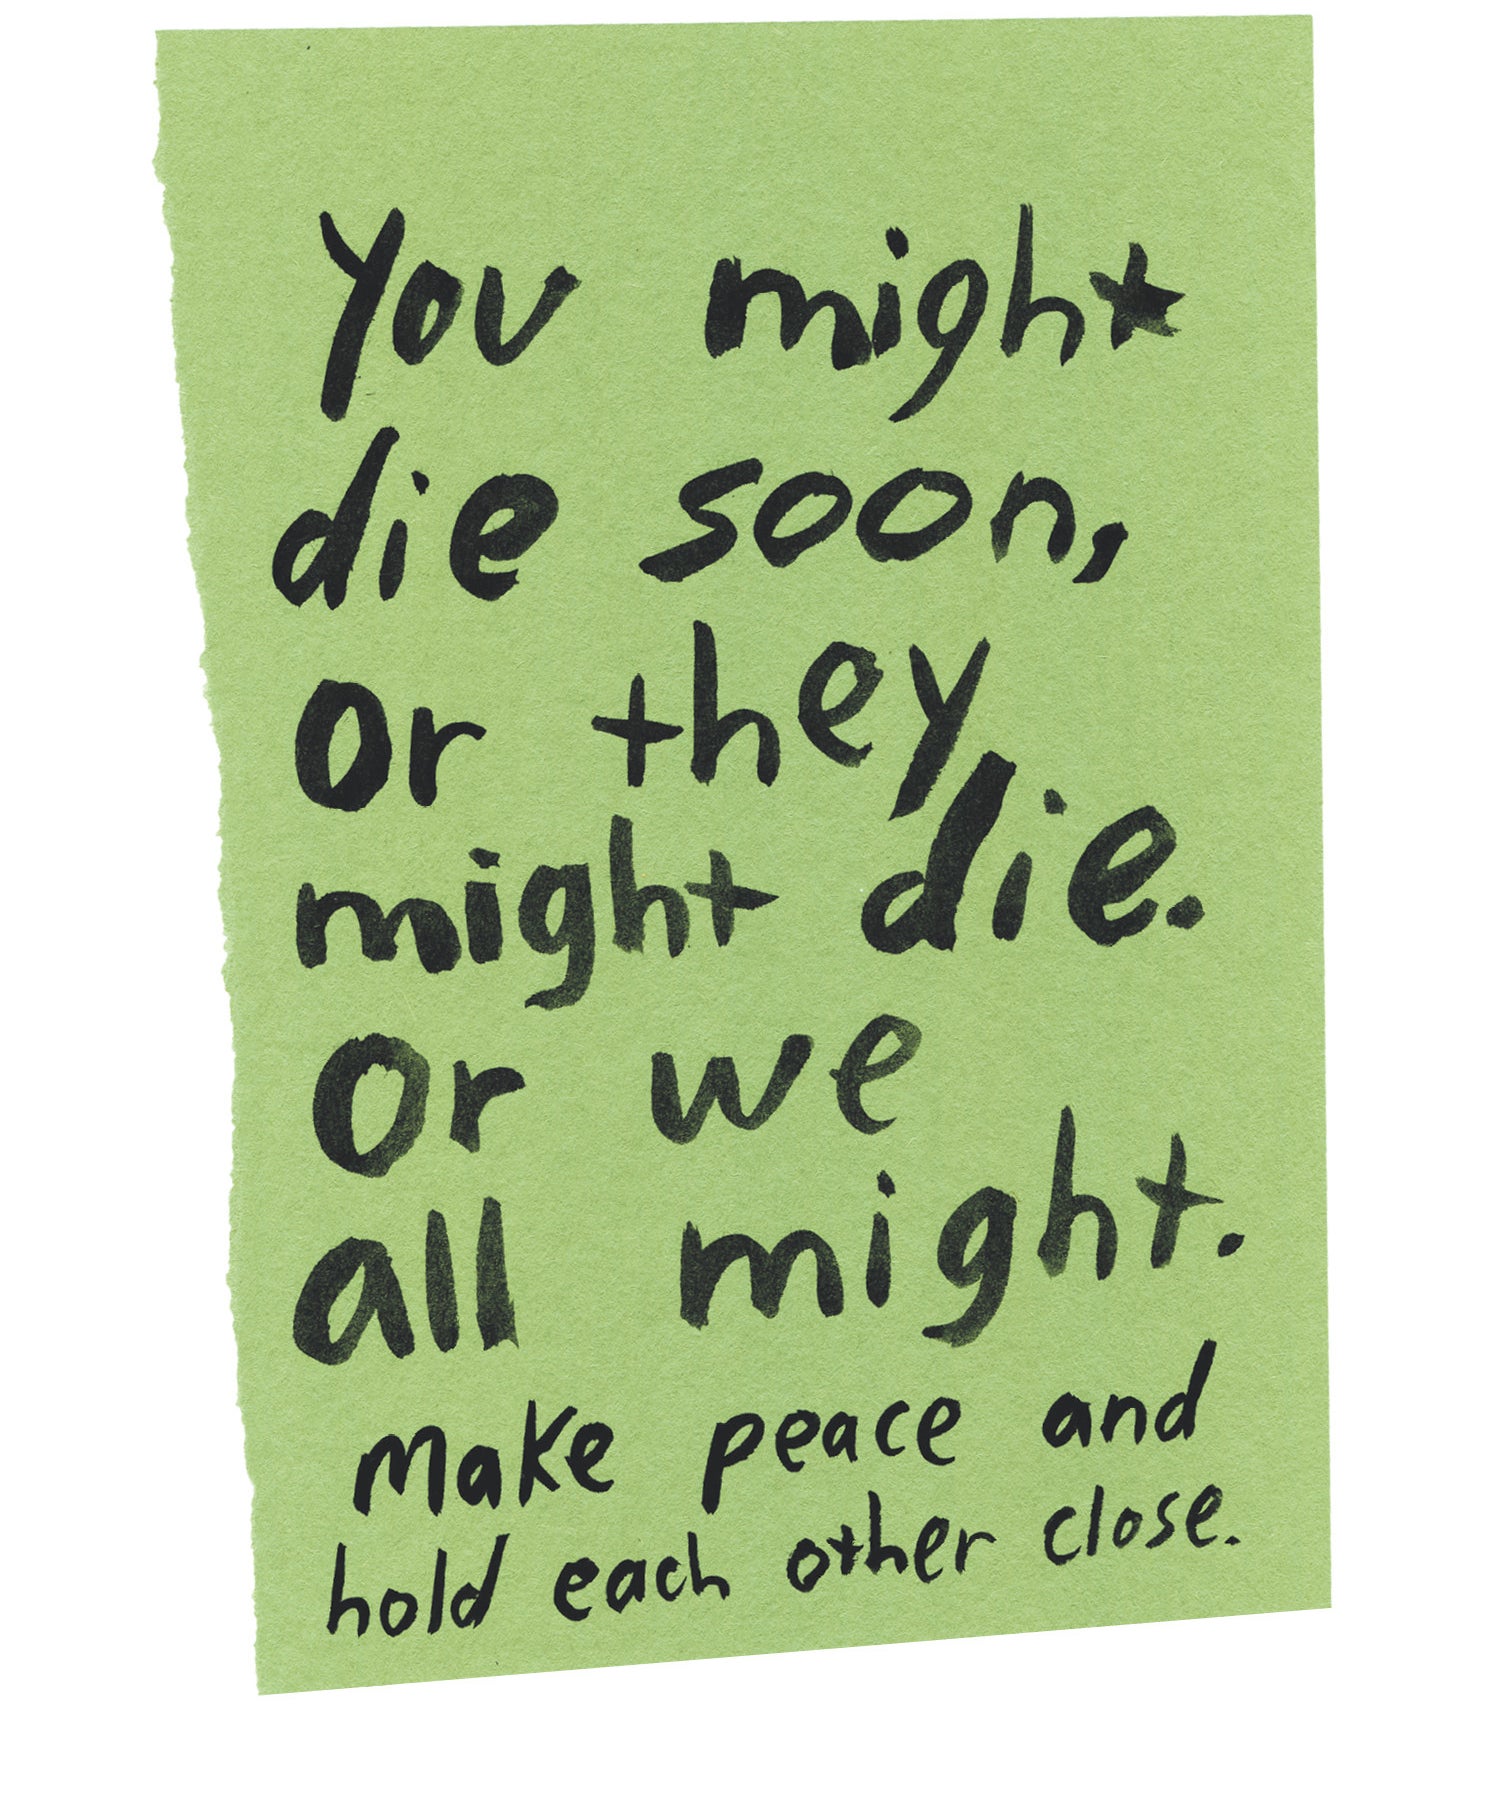 Handwritten text on torn piece of colored paper: &quot;You might die soon, or they might die. Or we all might. Make peace and hold each other close.&quot;